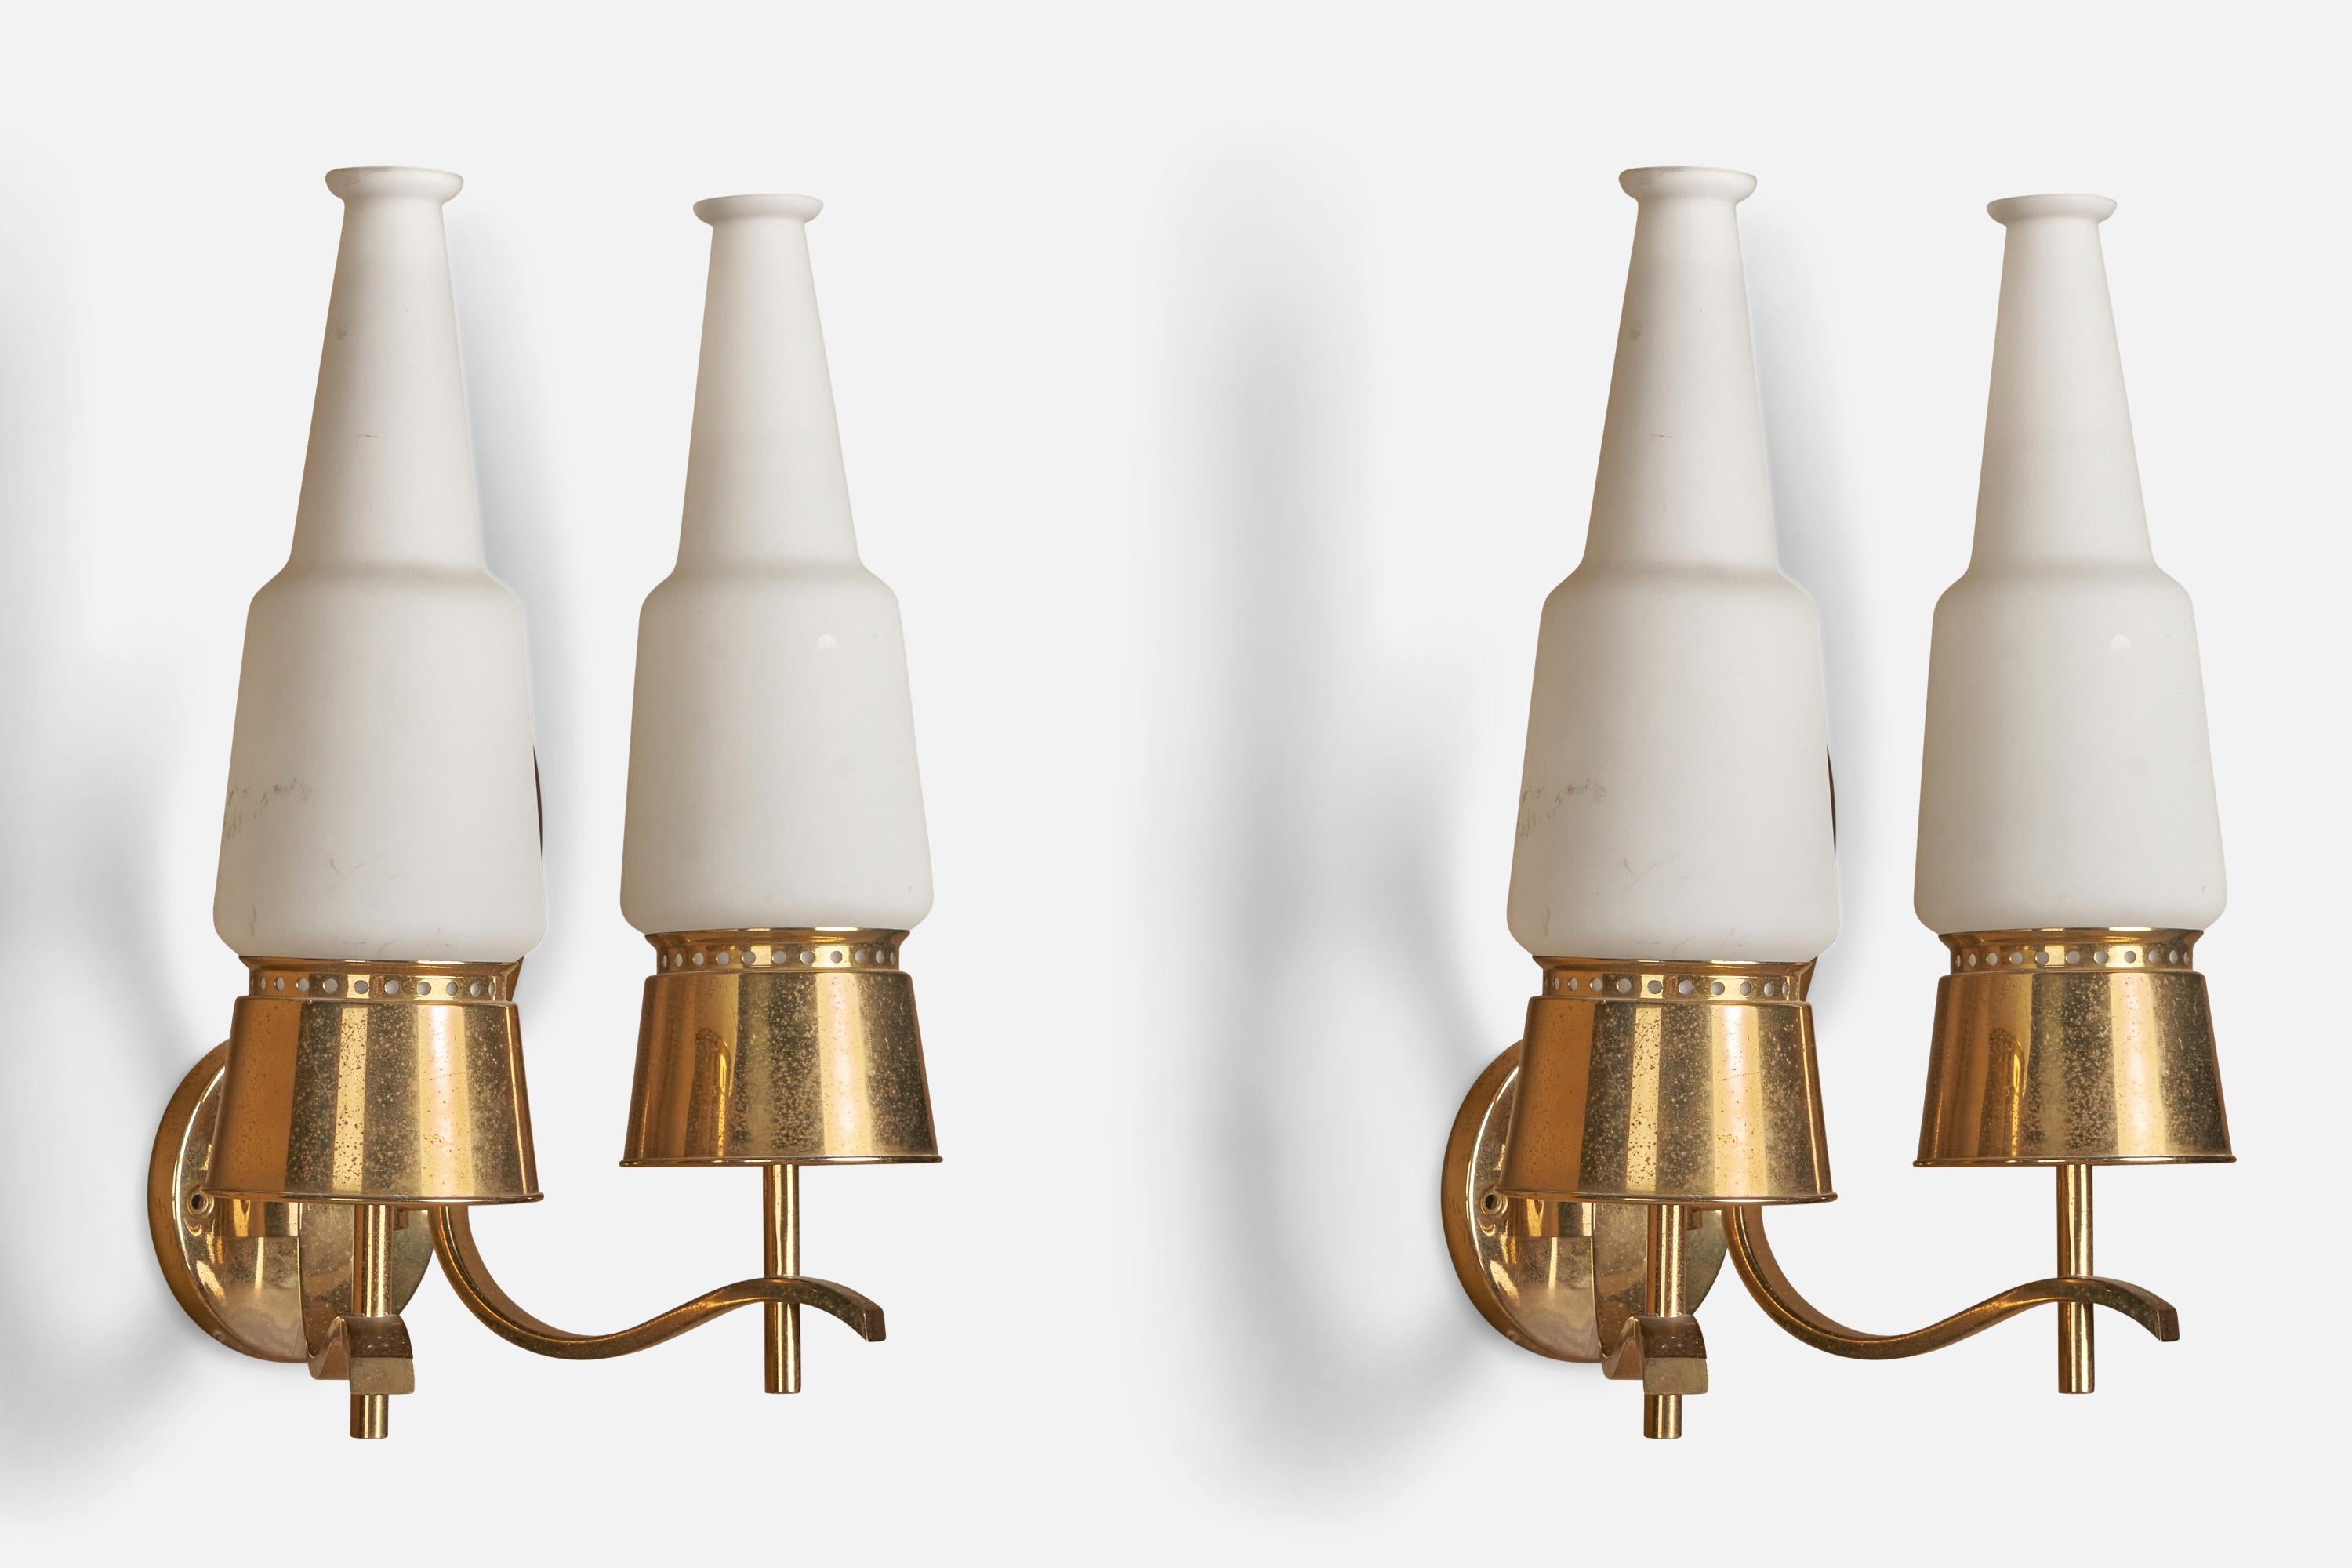 Italian Angelo Lelii, Wall Lights, Brass, Glass, Italy, 1950s For Sale